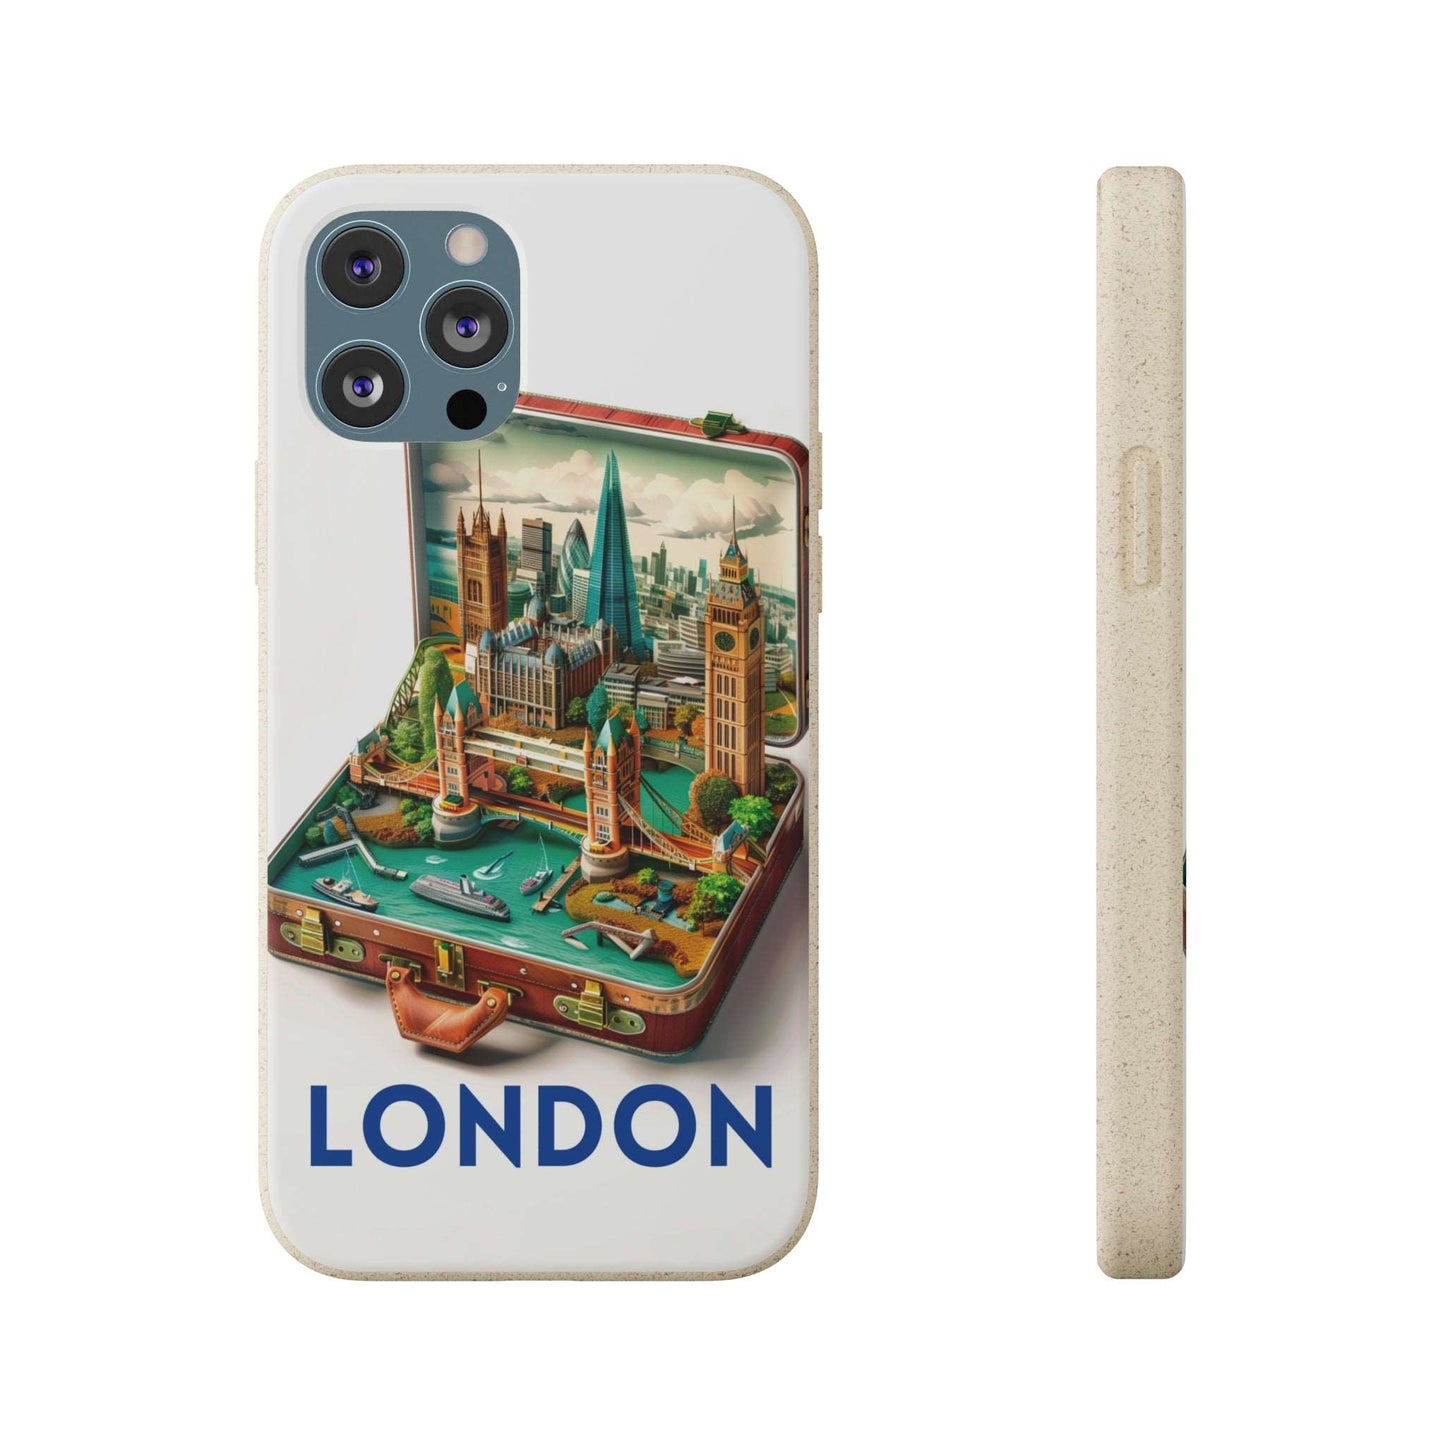 London phone case made from sustainable plant-based materials and bamboo fibers. Biodegradable and wireless charging compatible